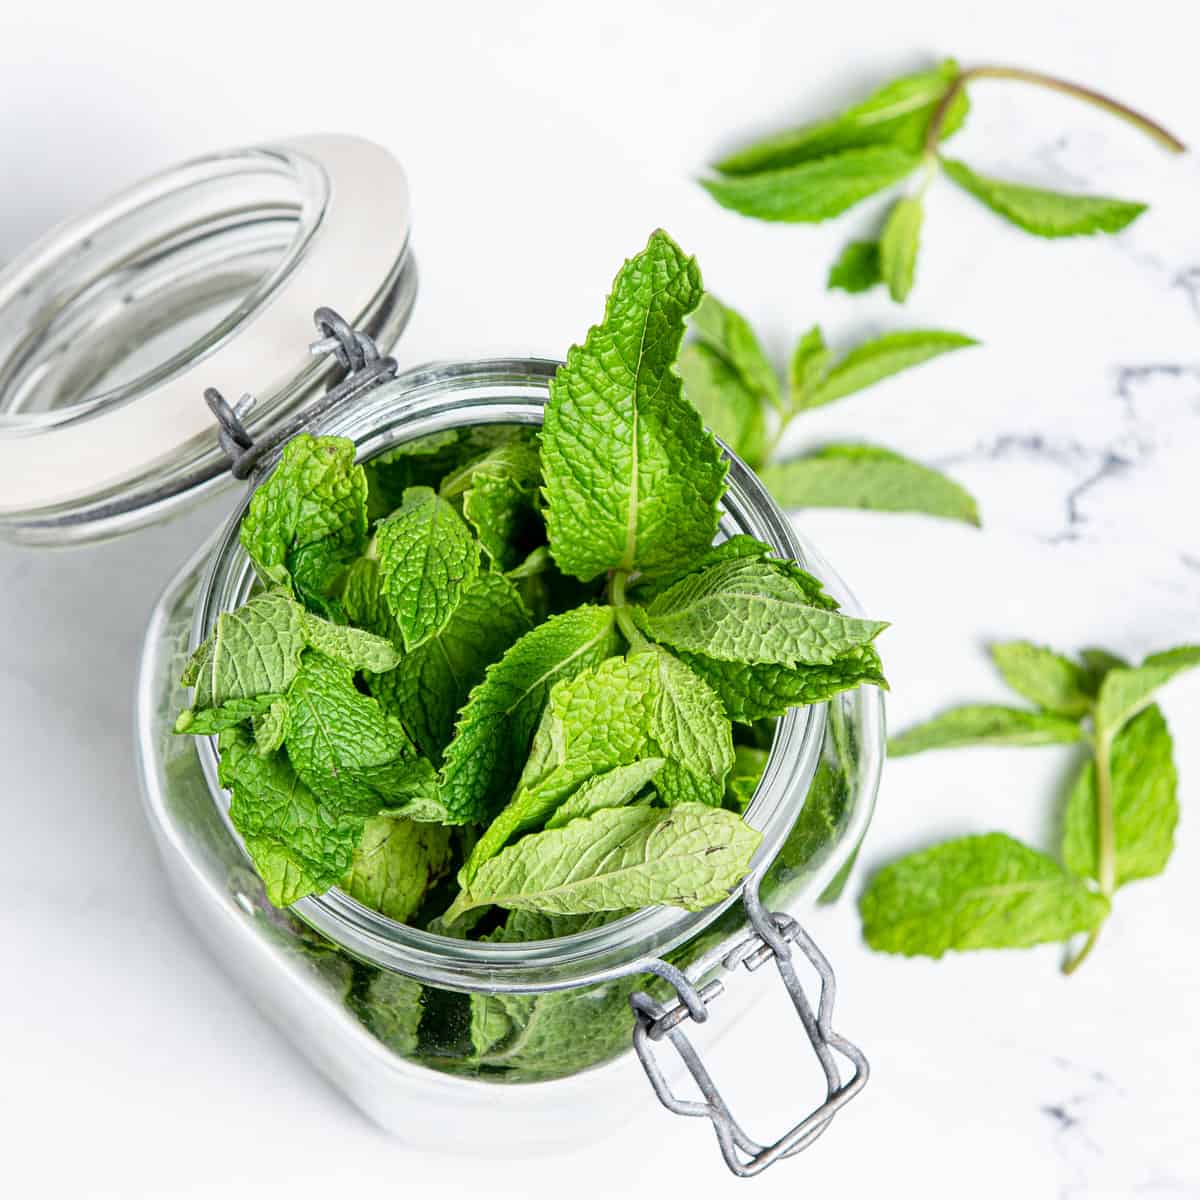 Mint in glass jar on a kitchen counter.